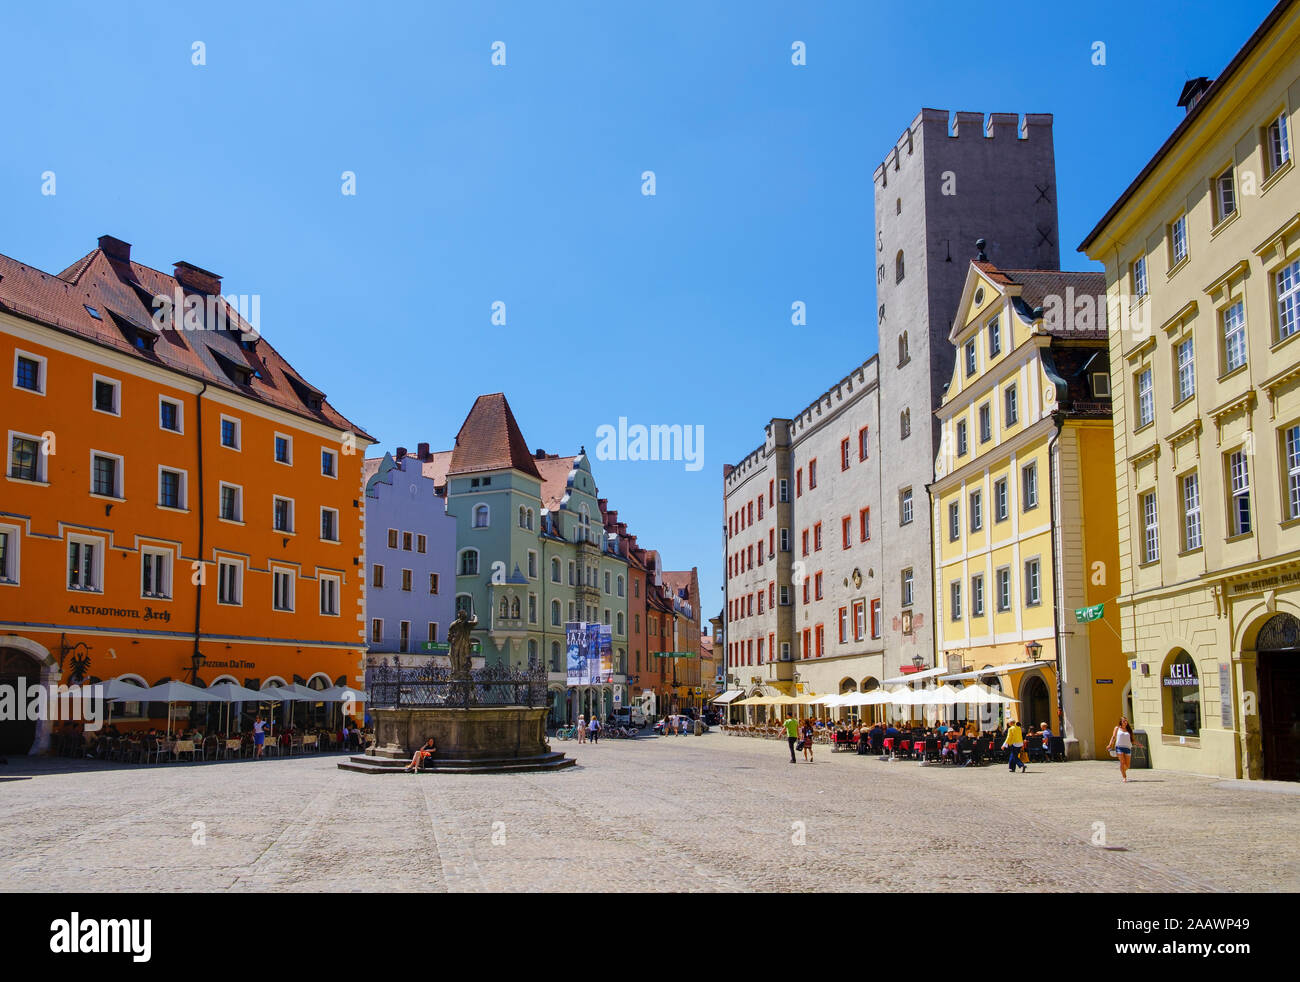 Buildings with Justitia fountain against clear blue sky at Haidplatz, Regensburg, Upper Palatinate, Bavaria, Germany Stock Photo